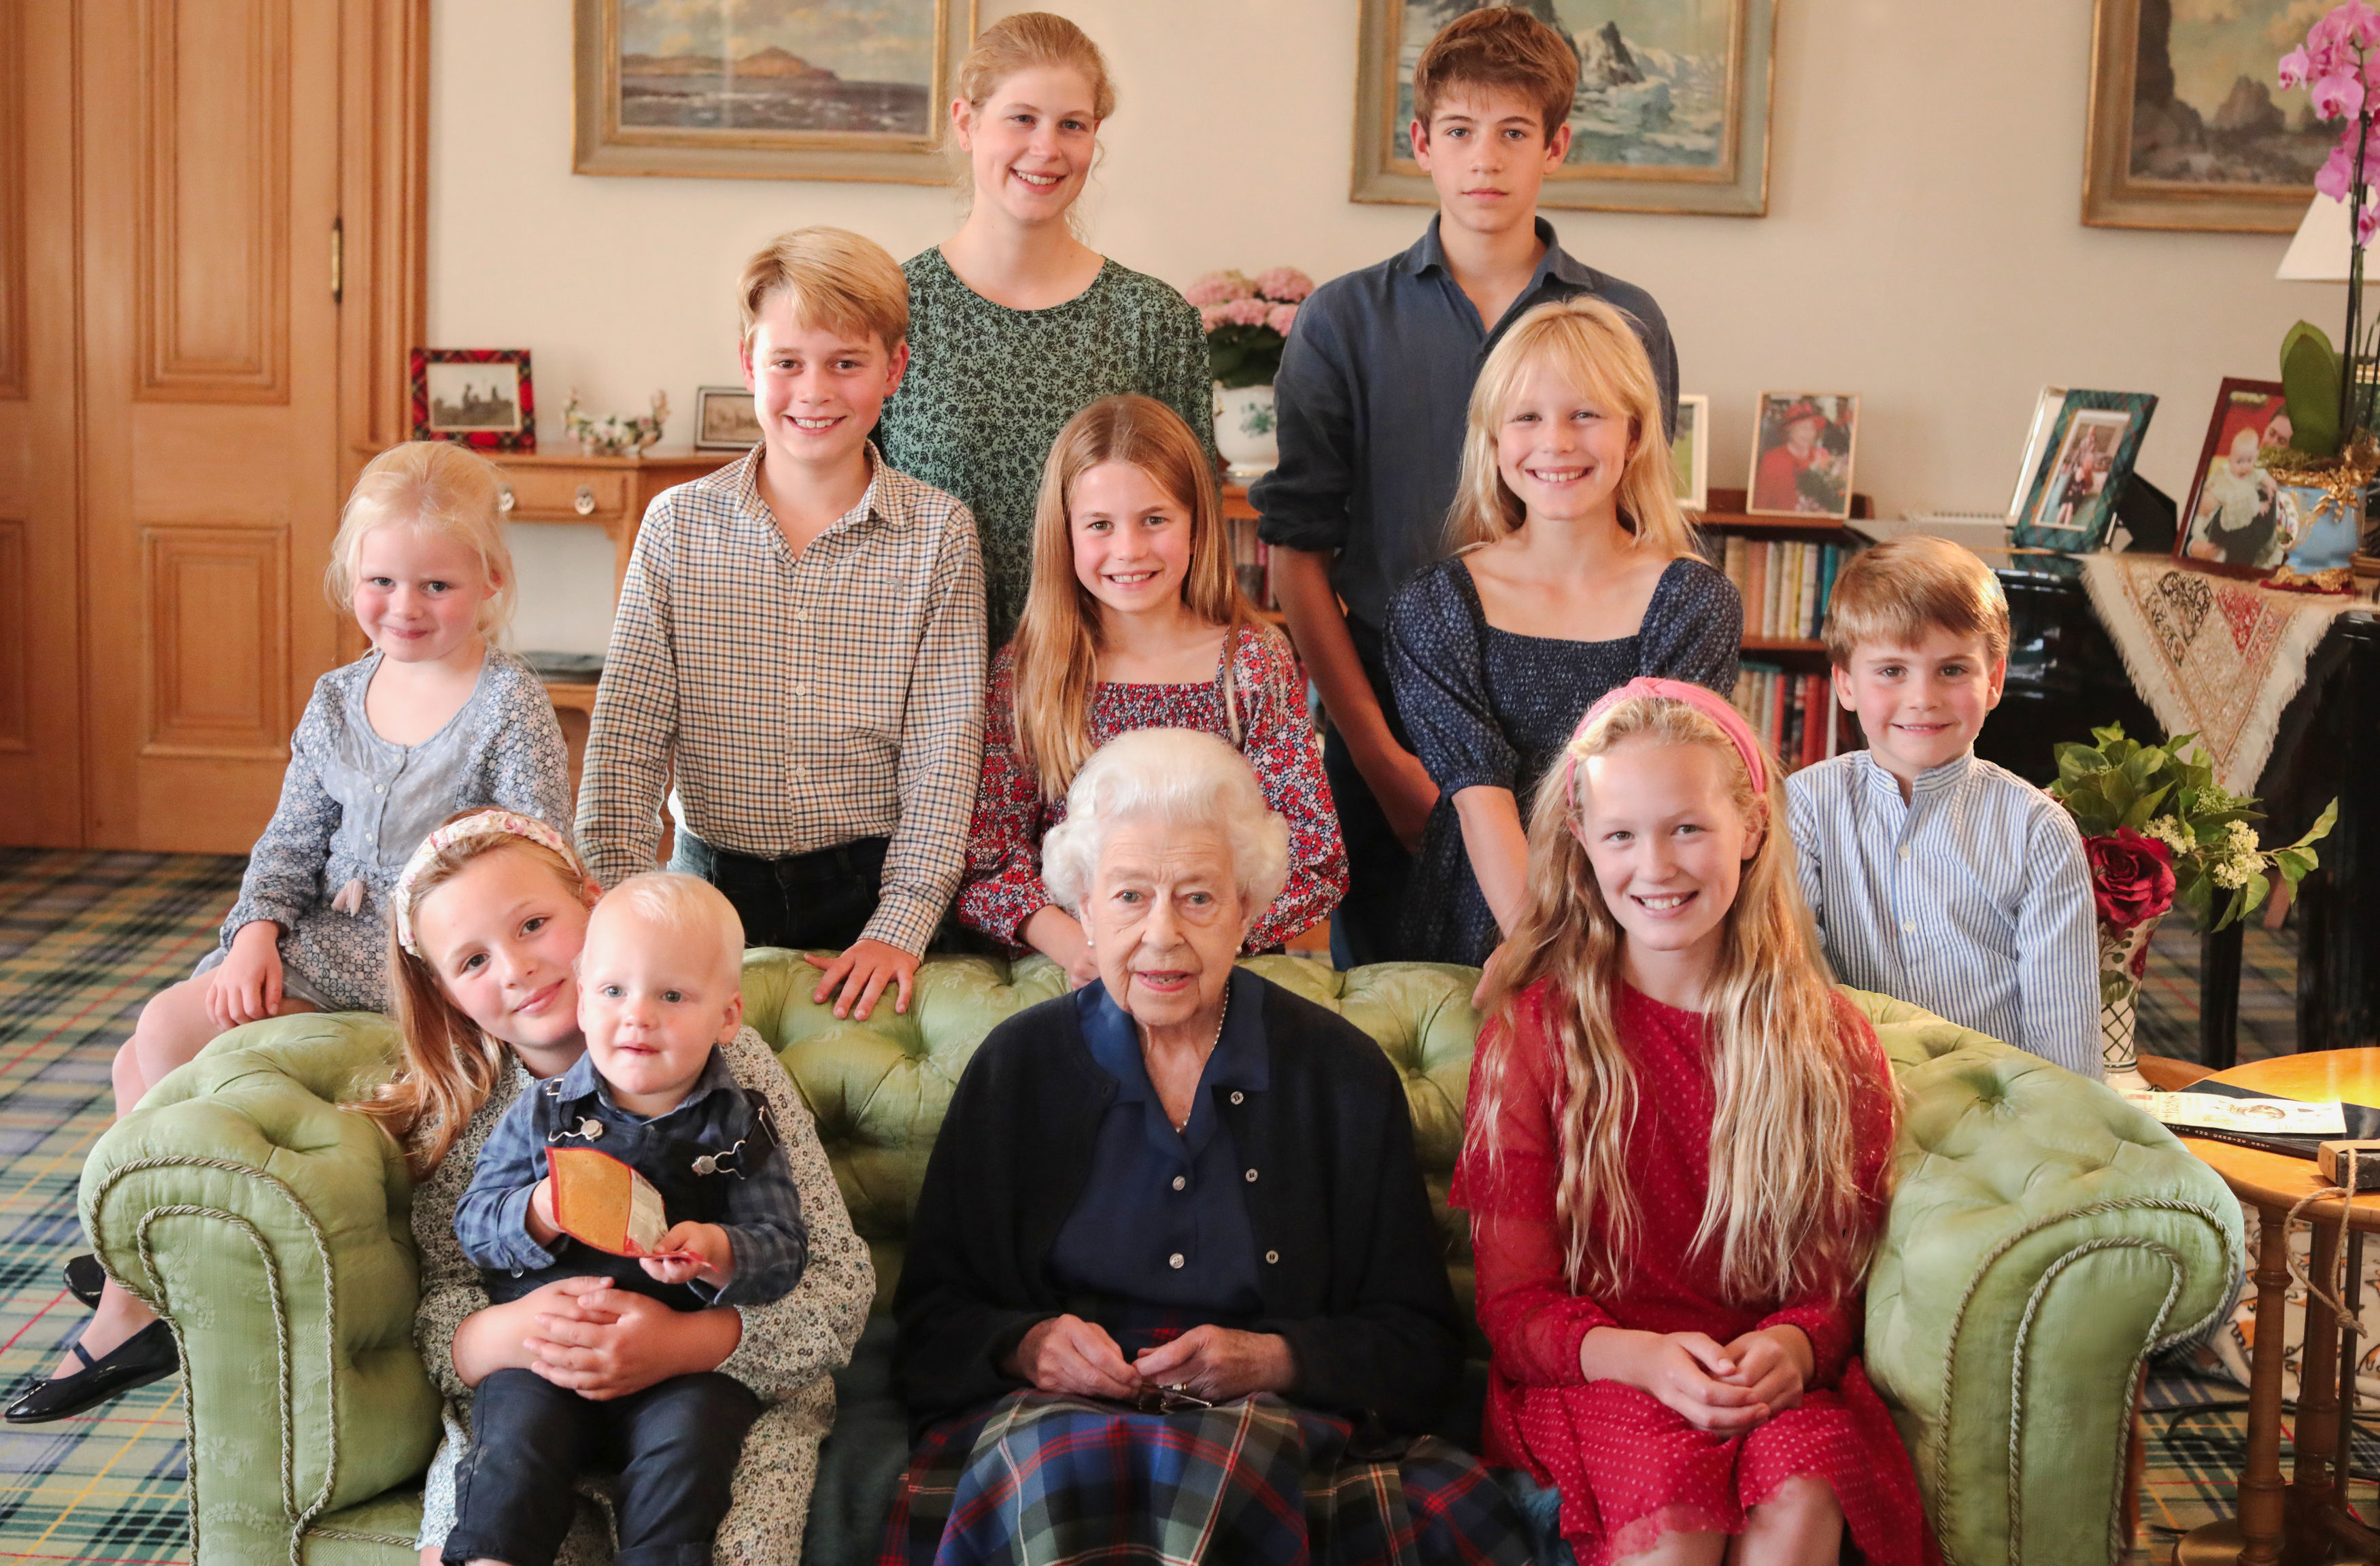 <p>Kensington Palace released this photo of some of Queen Elizabeth II's grandchildren and great-grandchildren -- including the Prince and Princess of Wales' three kids -- to mark what would have been the late monarch's 97th birthday in April 2023. The photograph was taken by Princess Kate at the monarch's Balmoral estate in Scotland in the summer of 2022. Back row, from left: Lady Louise Mountbatten-Windsor and James, Earl of Wessex. Middle row, from left: Lena Tindall, Prince George, Princess Charlotte, Isla Phillips, Prince Louis. Front row, from left: Mia Tindall holding Lucas Tindall, Queen Elizabeth II and Savannah Phillips.</p>